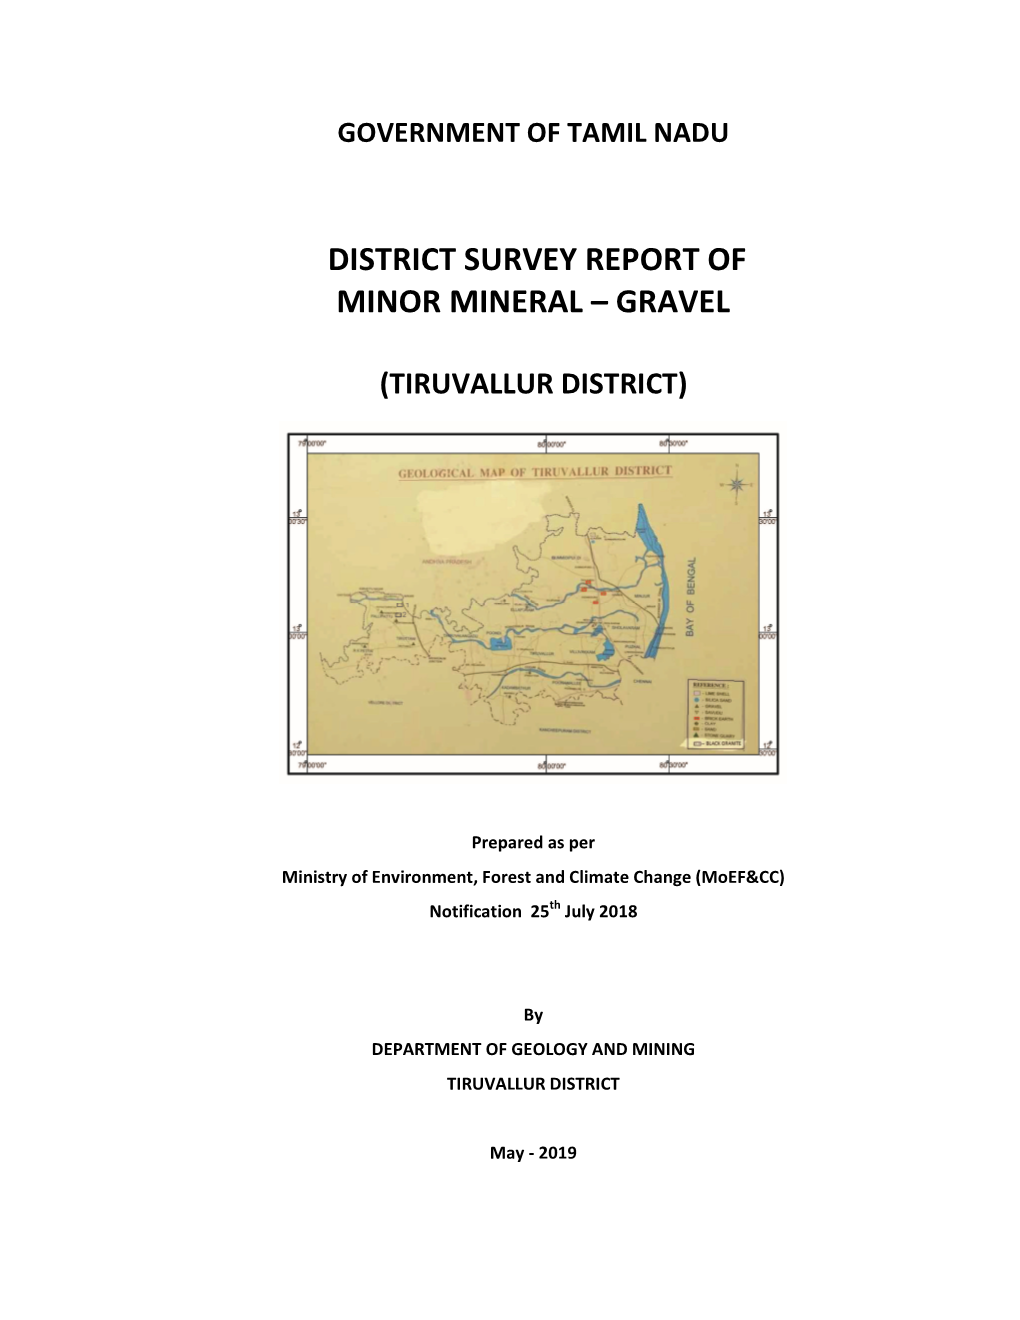 District Survey Report of Minor Mineral – Gravel